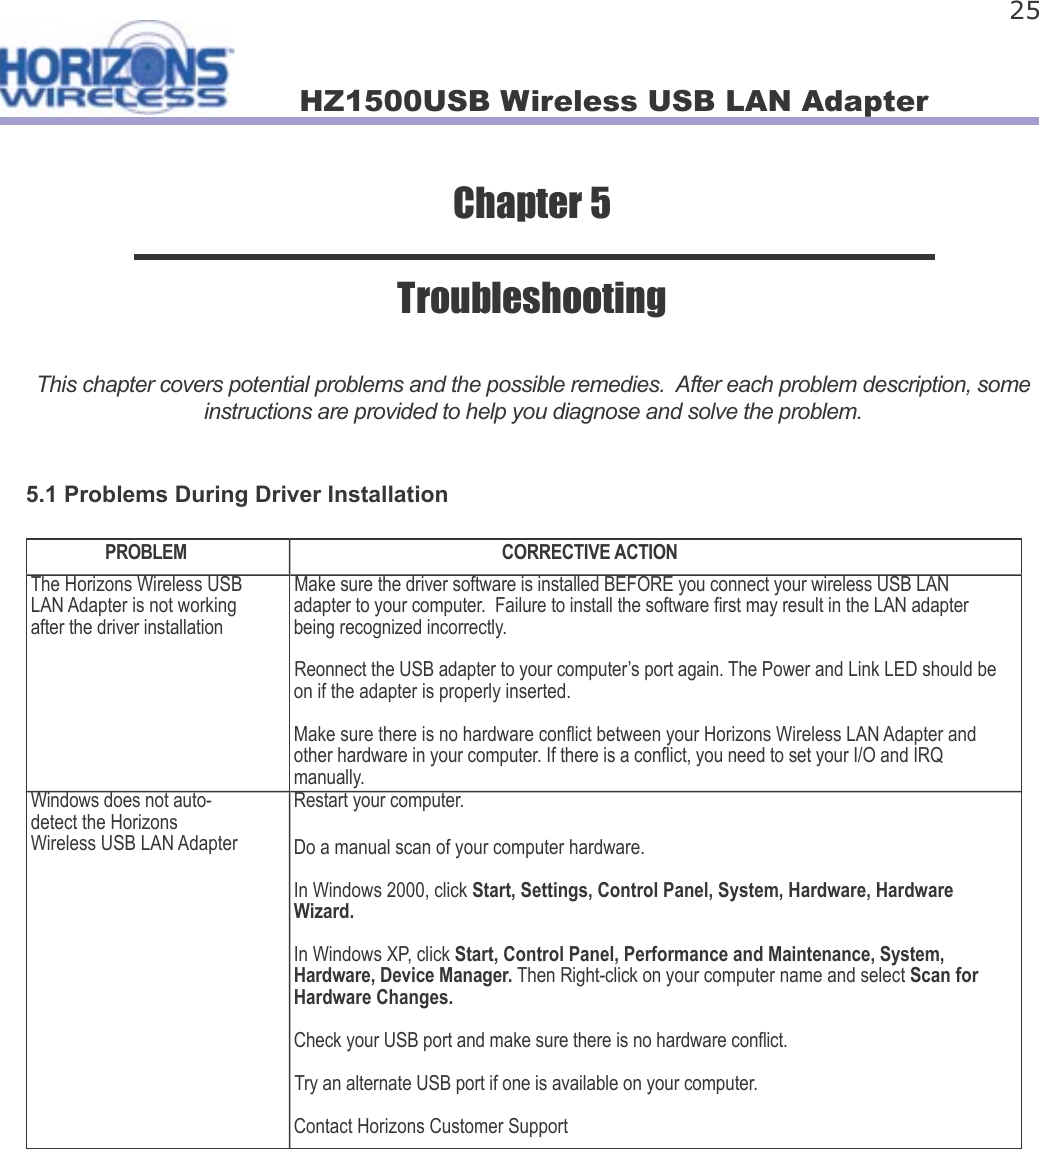 HZ1500USB Wireless USB LAN Adapter 25Chapter 5TroubleshootingThis chapter covers potential problems and the possible remedies.  After each problem description, some instructions are provided to help you diagnose and solve the problem.5.1 Problems During Driver InstallationPROBLEM CORRECTIVE ACTIONThe Horizons Wireless USB LAN Adapter is not working after the driver installationMake sure the driver software is installed BEFORE you connect your wireless USB LAN adapter to your computer.  Failure to install the software  rst may result in the LAN adapter being recognized incorrectly.Reonnect the USB adapter to your computer’s port again. The Power and Link LED should be on if the adapter is properly inserted.Make sure there is no hardware con ict between your Horizons Wireless LAN Adapter and other hardware in your computer. If there is a con ict, you need to set your I/O and IRQ manually.Windows does not auto-detect the Horizons Wireless USB LAN AdapterRestart your computer.Do a manual scan of your computer hardware. In Windows 2000, click Start, Settings, Control Panel, System, Hardware, Hardware Wizard. In Windows XP, click Start, Control Panel, Performance and Maintenance, System, Hardware, Device Manager. Then Right-click on your computer name and select Scan for Hardware Changes.Check your USB port and make sure there is no hardware con ict.Try an alternate USB port if one is available on your computer.Contact Horizons Customer Support